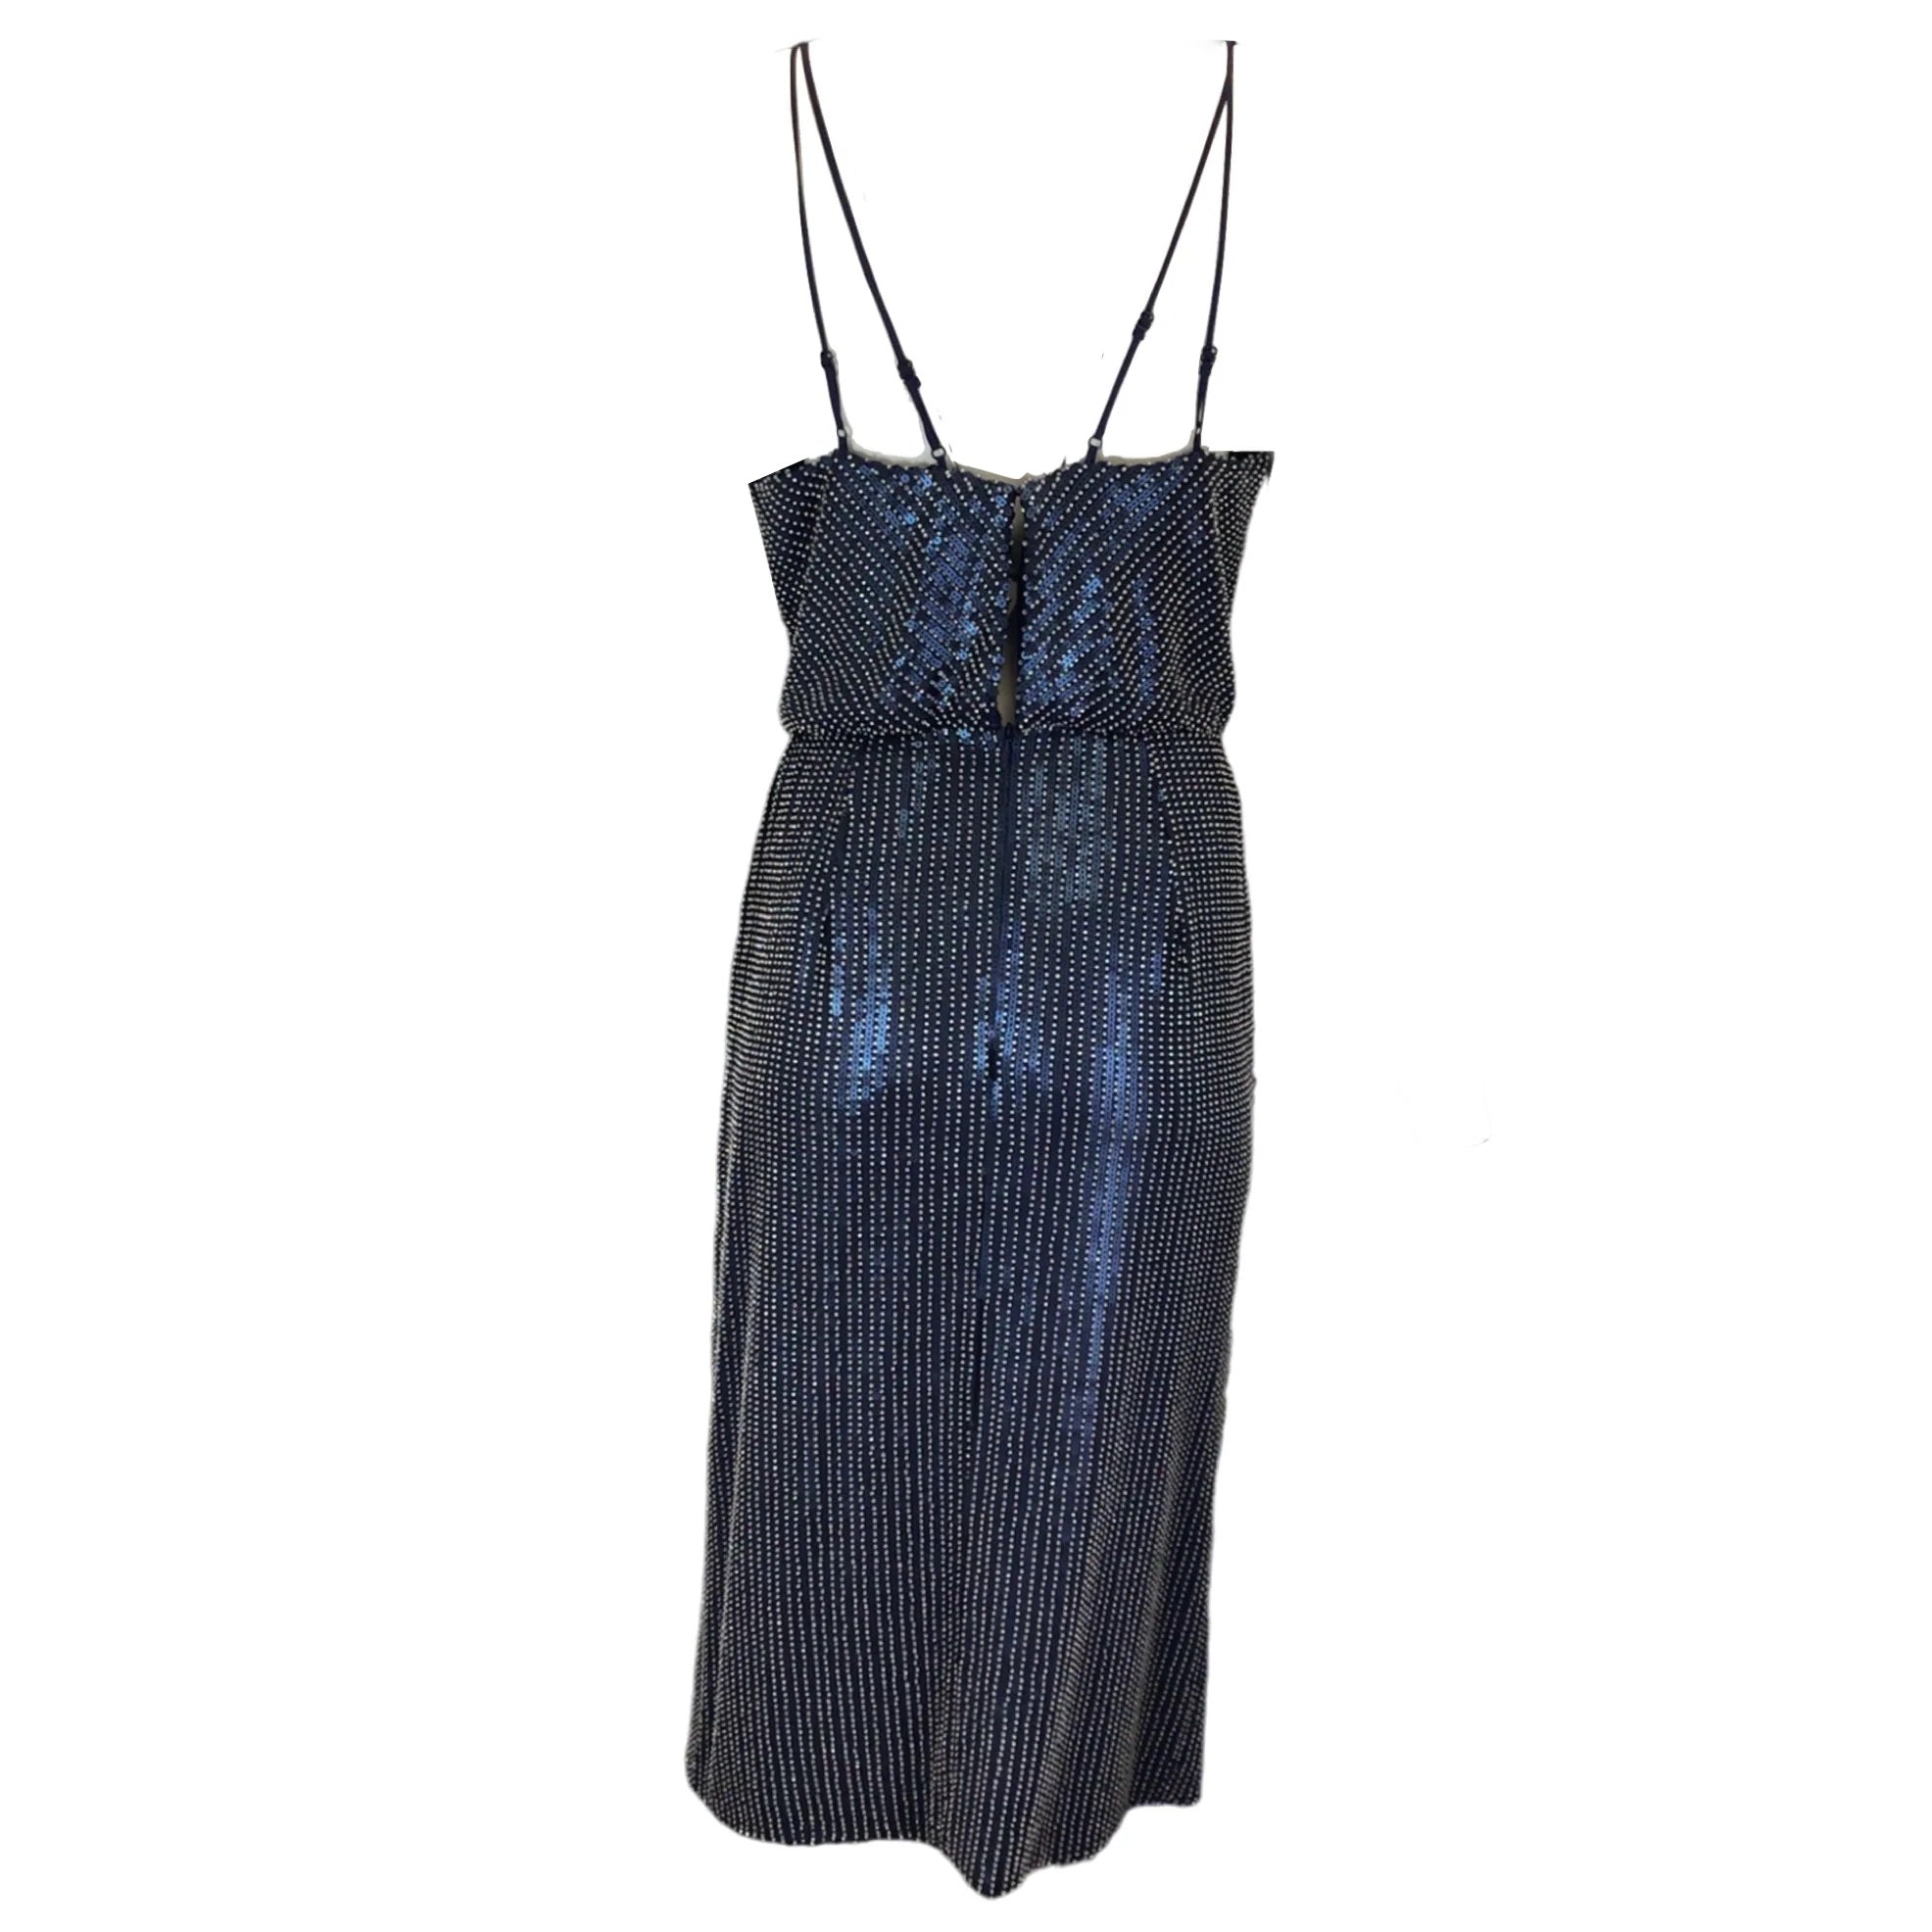 Haney Navy Blue / Silver Bead and Sequin Embellished Dress